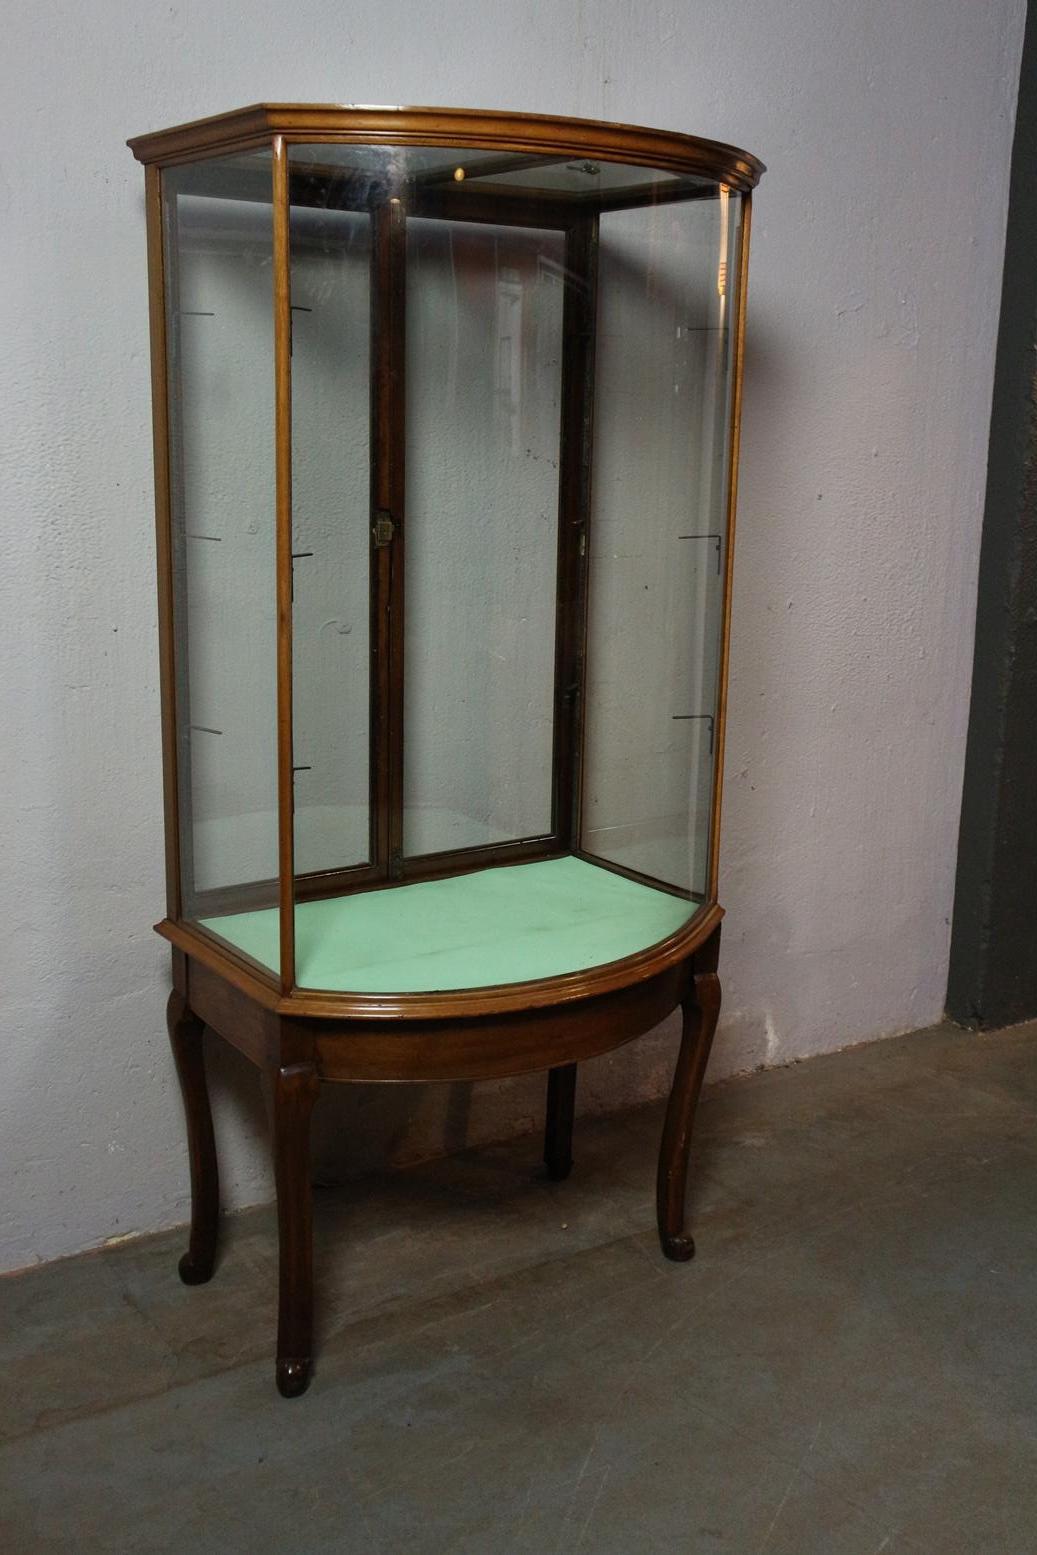 Antique walnut display case with curved glass. Entirely in good condition. With 3 adjustable glass shelves.
Origin: England
Period: Approx. 1900
Size: 88cm x d.65cm x h. 189cm